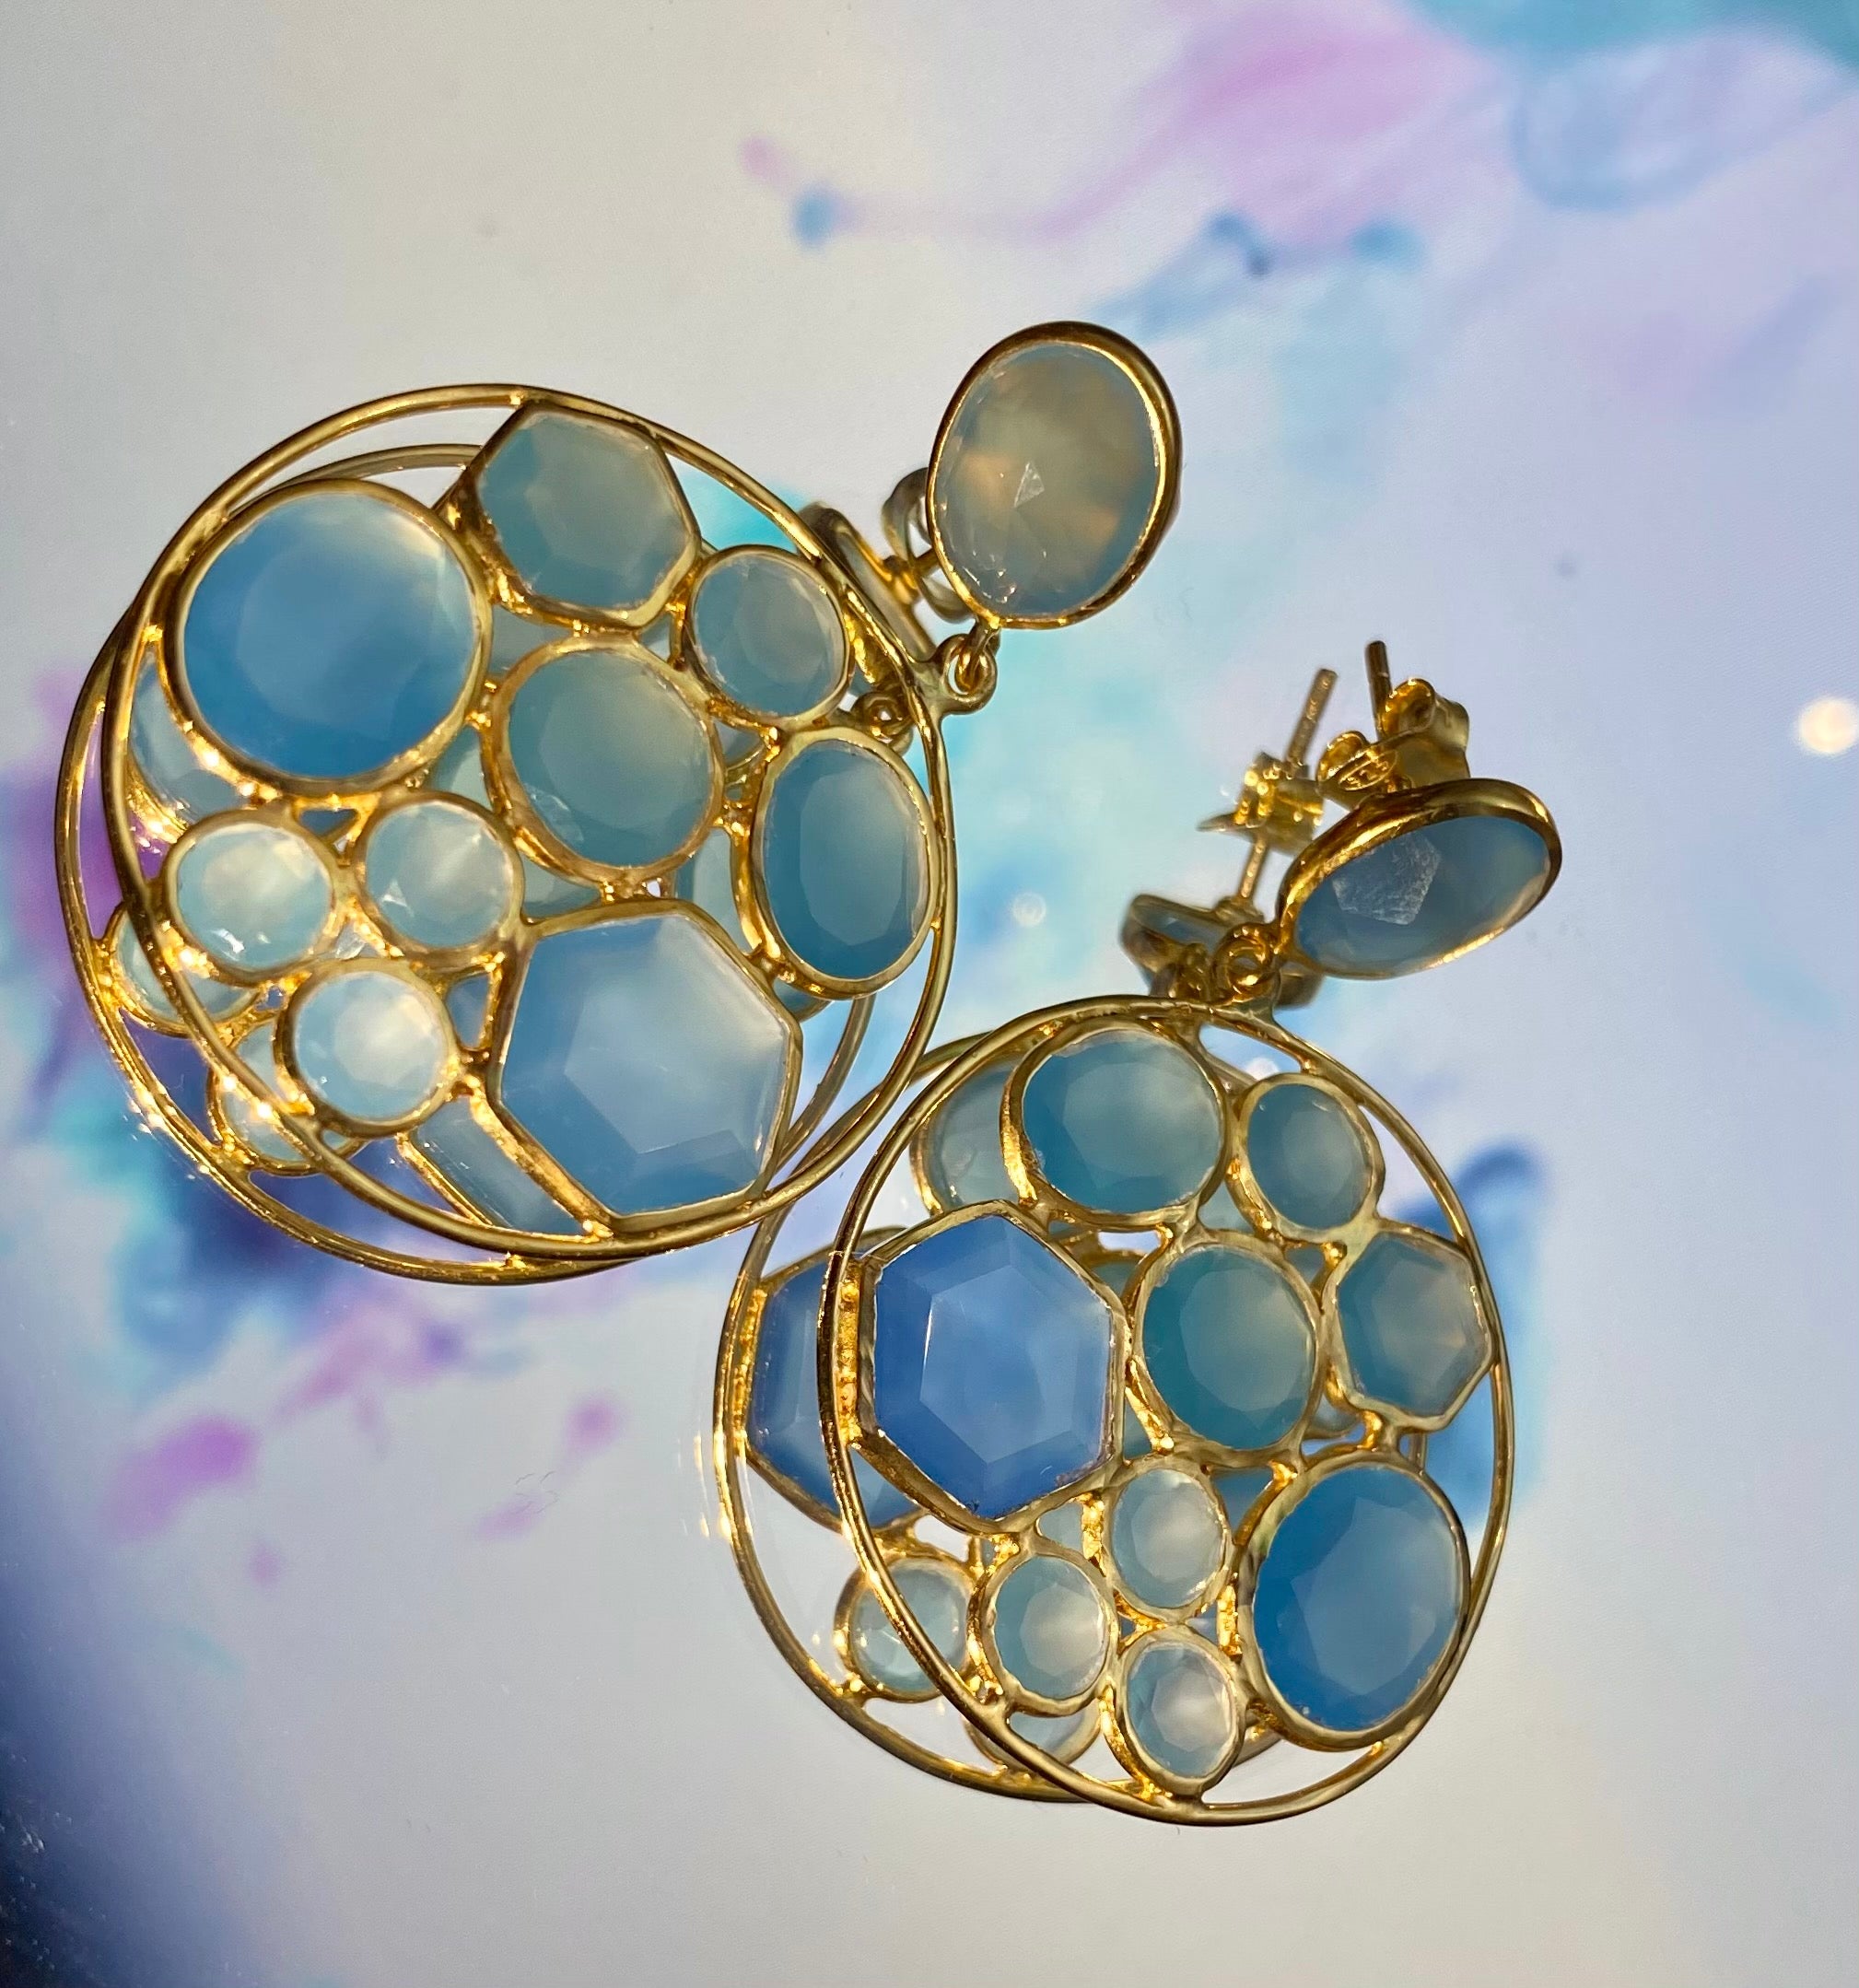 Long Gemstone Earrings with a Round Disc Drop with Stones in Gold Plated Sterling Silver - Aqua Chalcedony and Blue Topaz